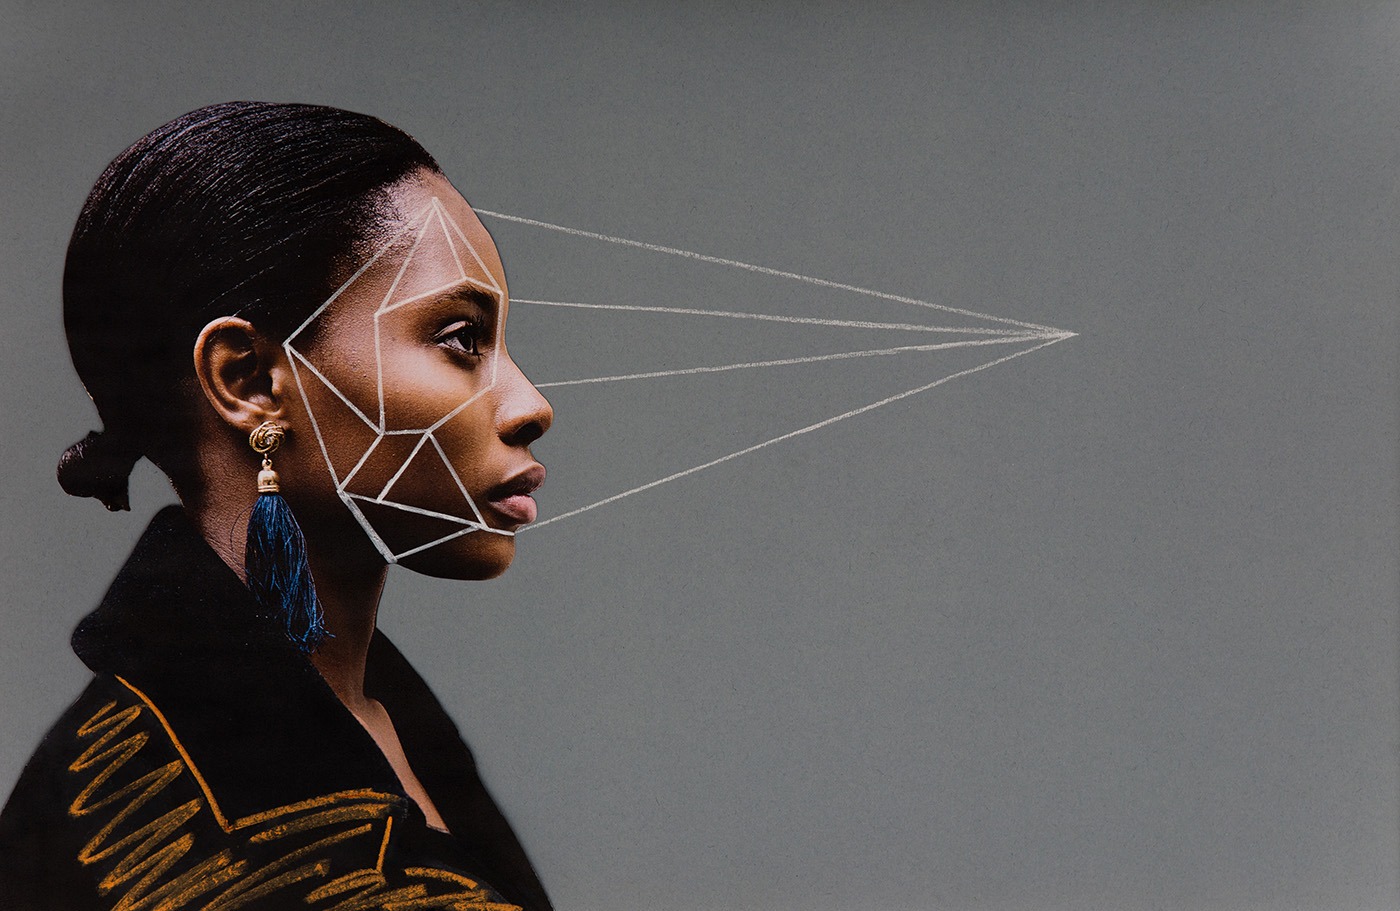 Analogue collage featuring a black woman in profile, with geometric shapes drawn onto her face, to map ways of calculating her beauty, with converging perspective lines.